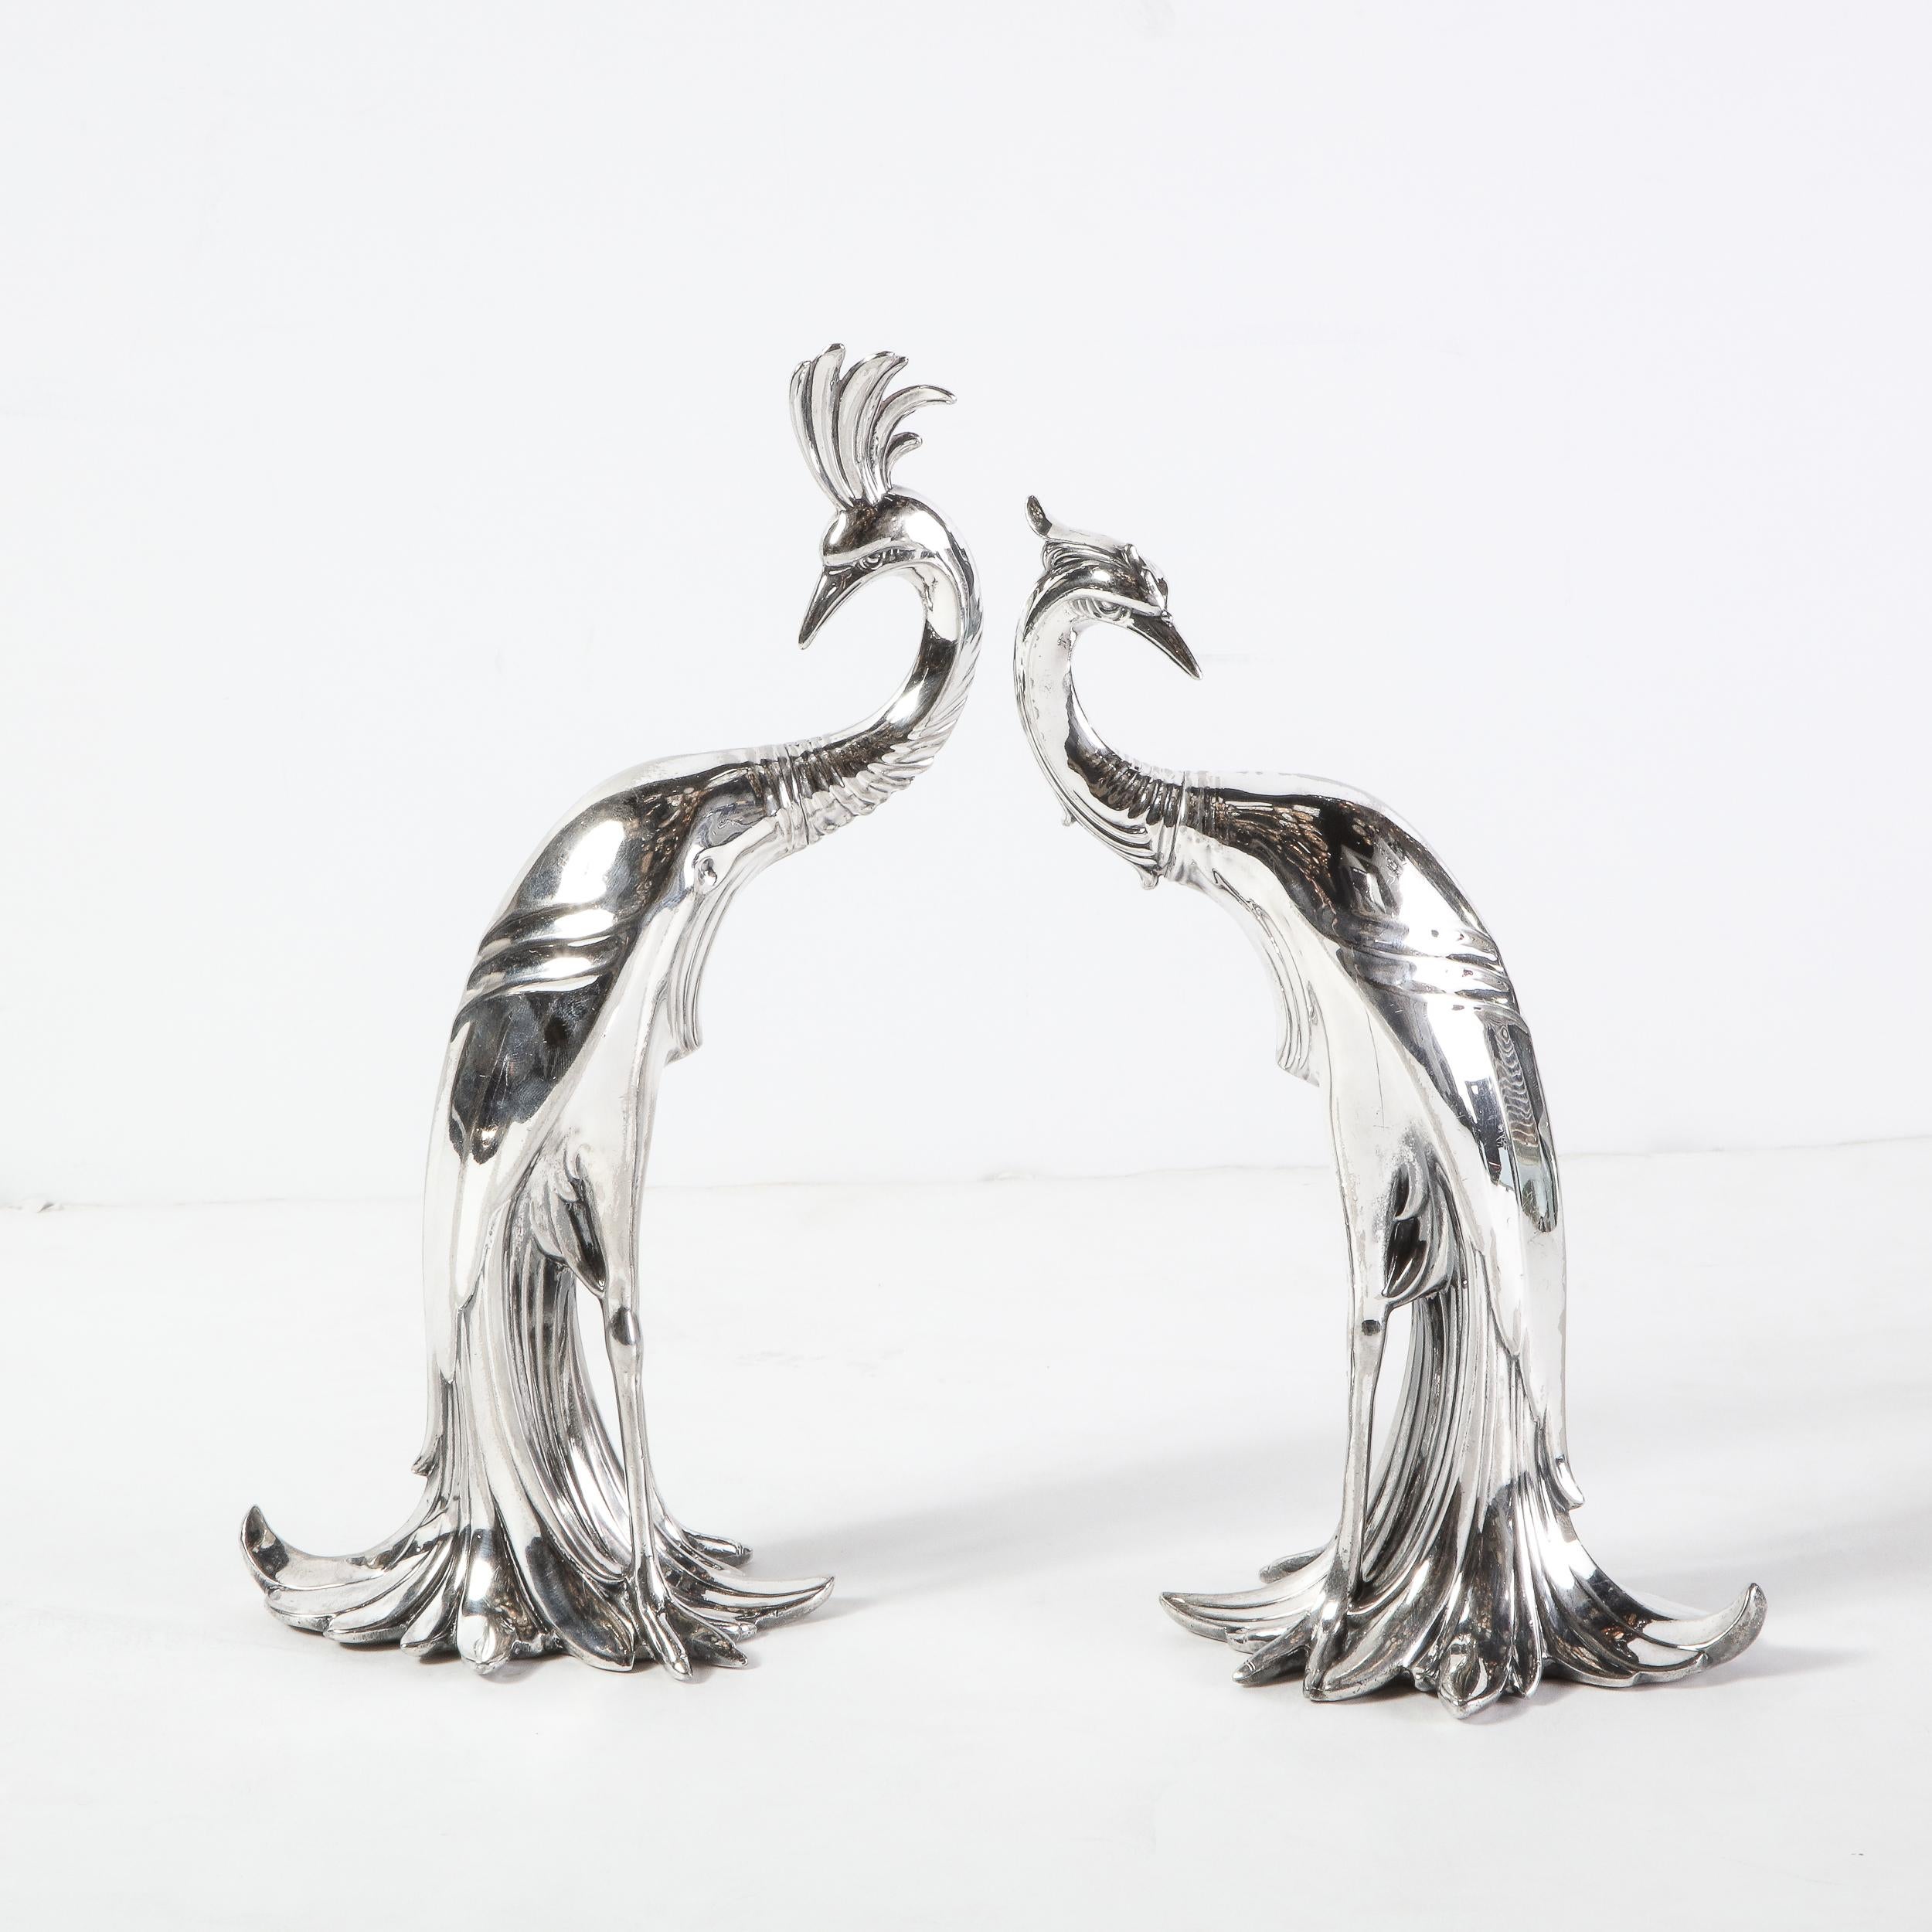 Pair of 1930s Art Deco Silverplated Stylized Peacock Sculptures by Weidlich Bros 7